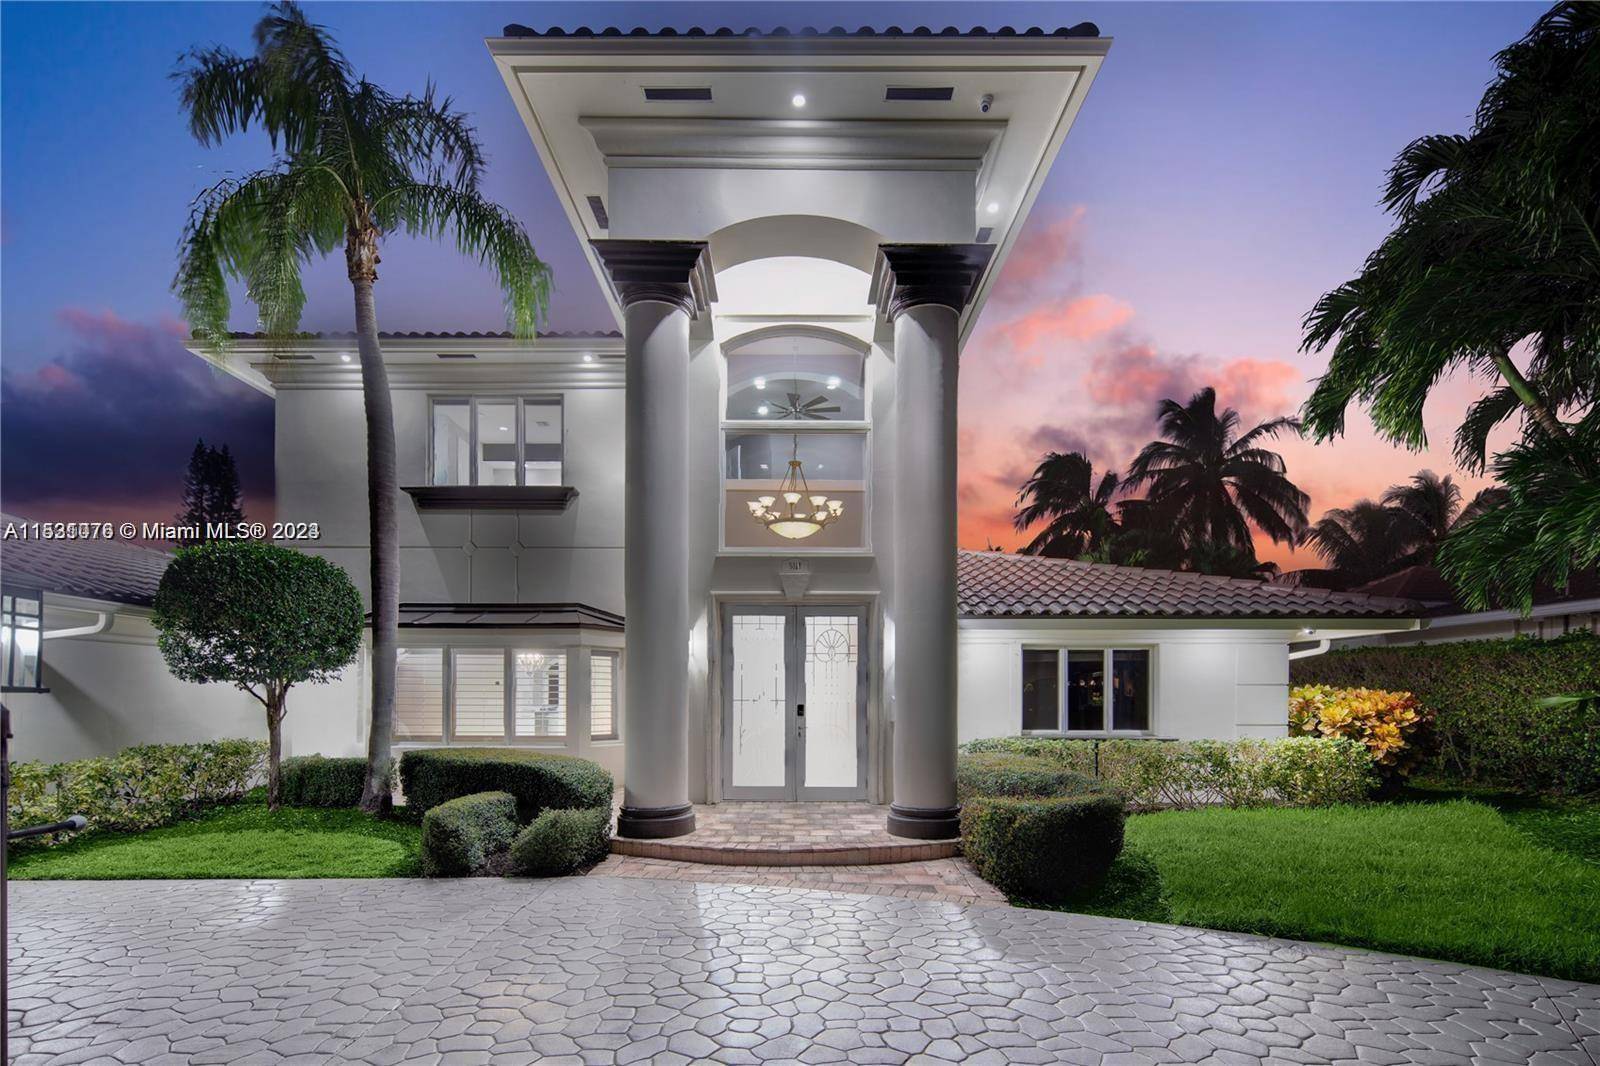 Welcome to This magnificent Exquisite 5 bedroom mansion offers an unparalleled living experience with its own 88 foot private dock and state of the art boat connections, perfectly catering to ...